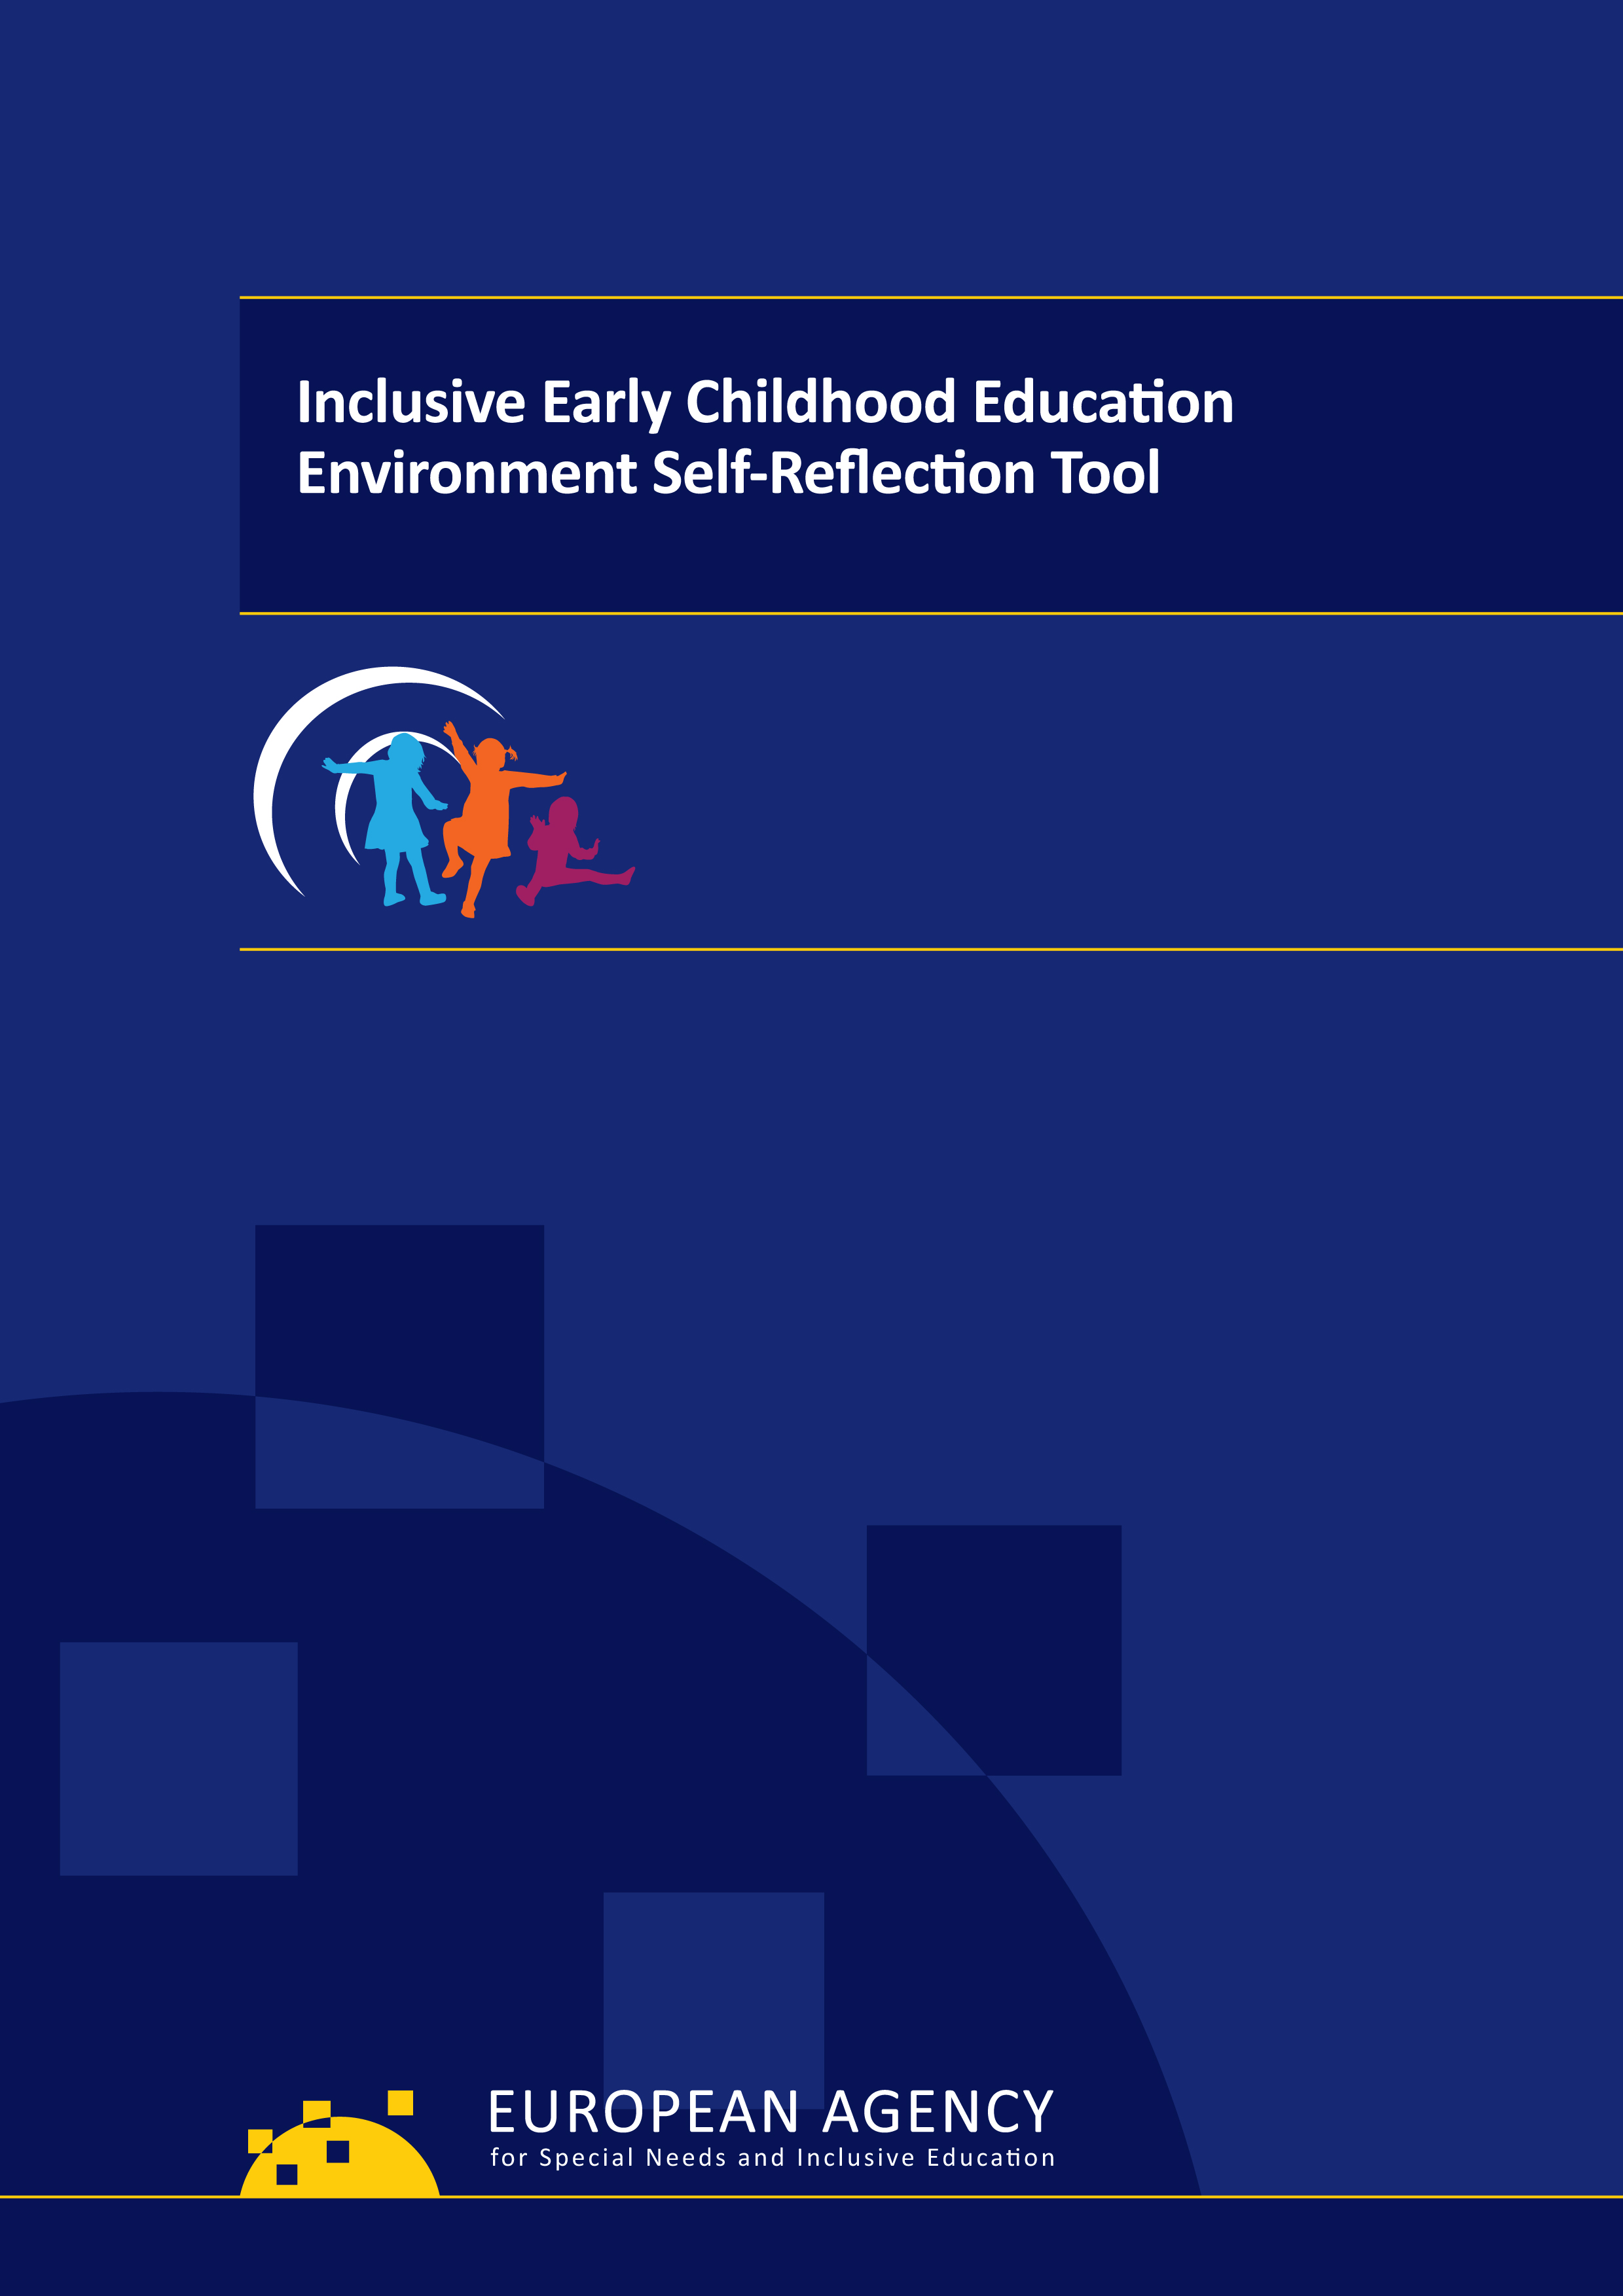 Inclusive Early Childhood Education Environment Self-Reflection Tool